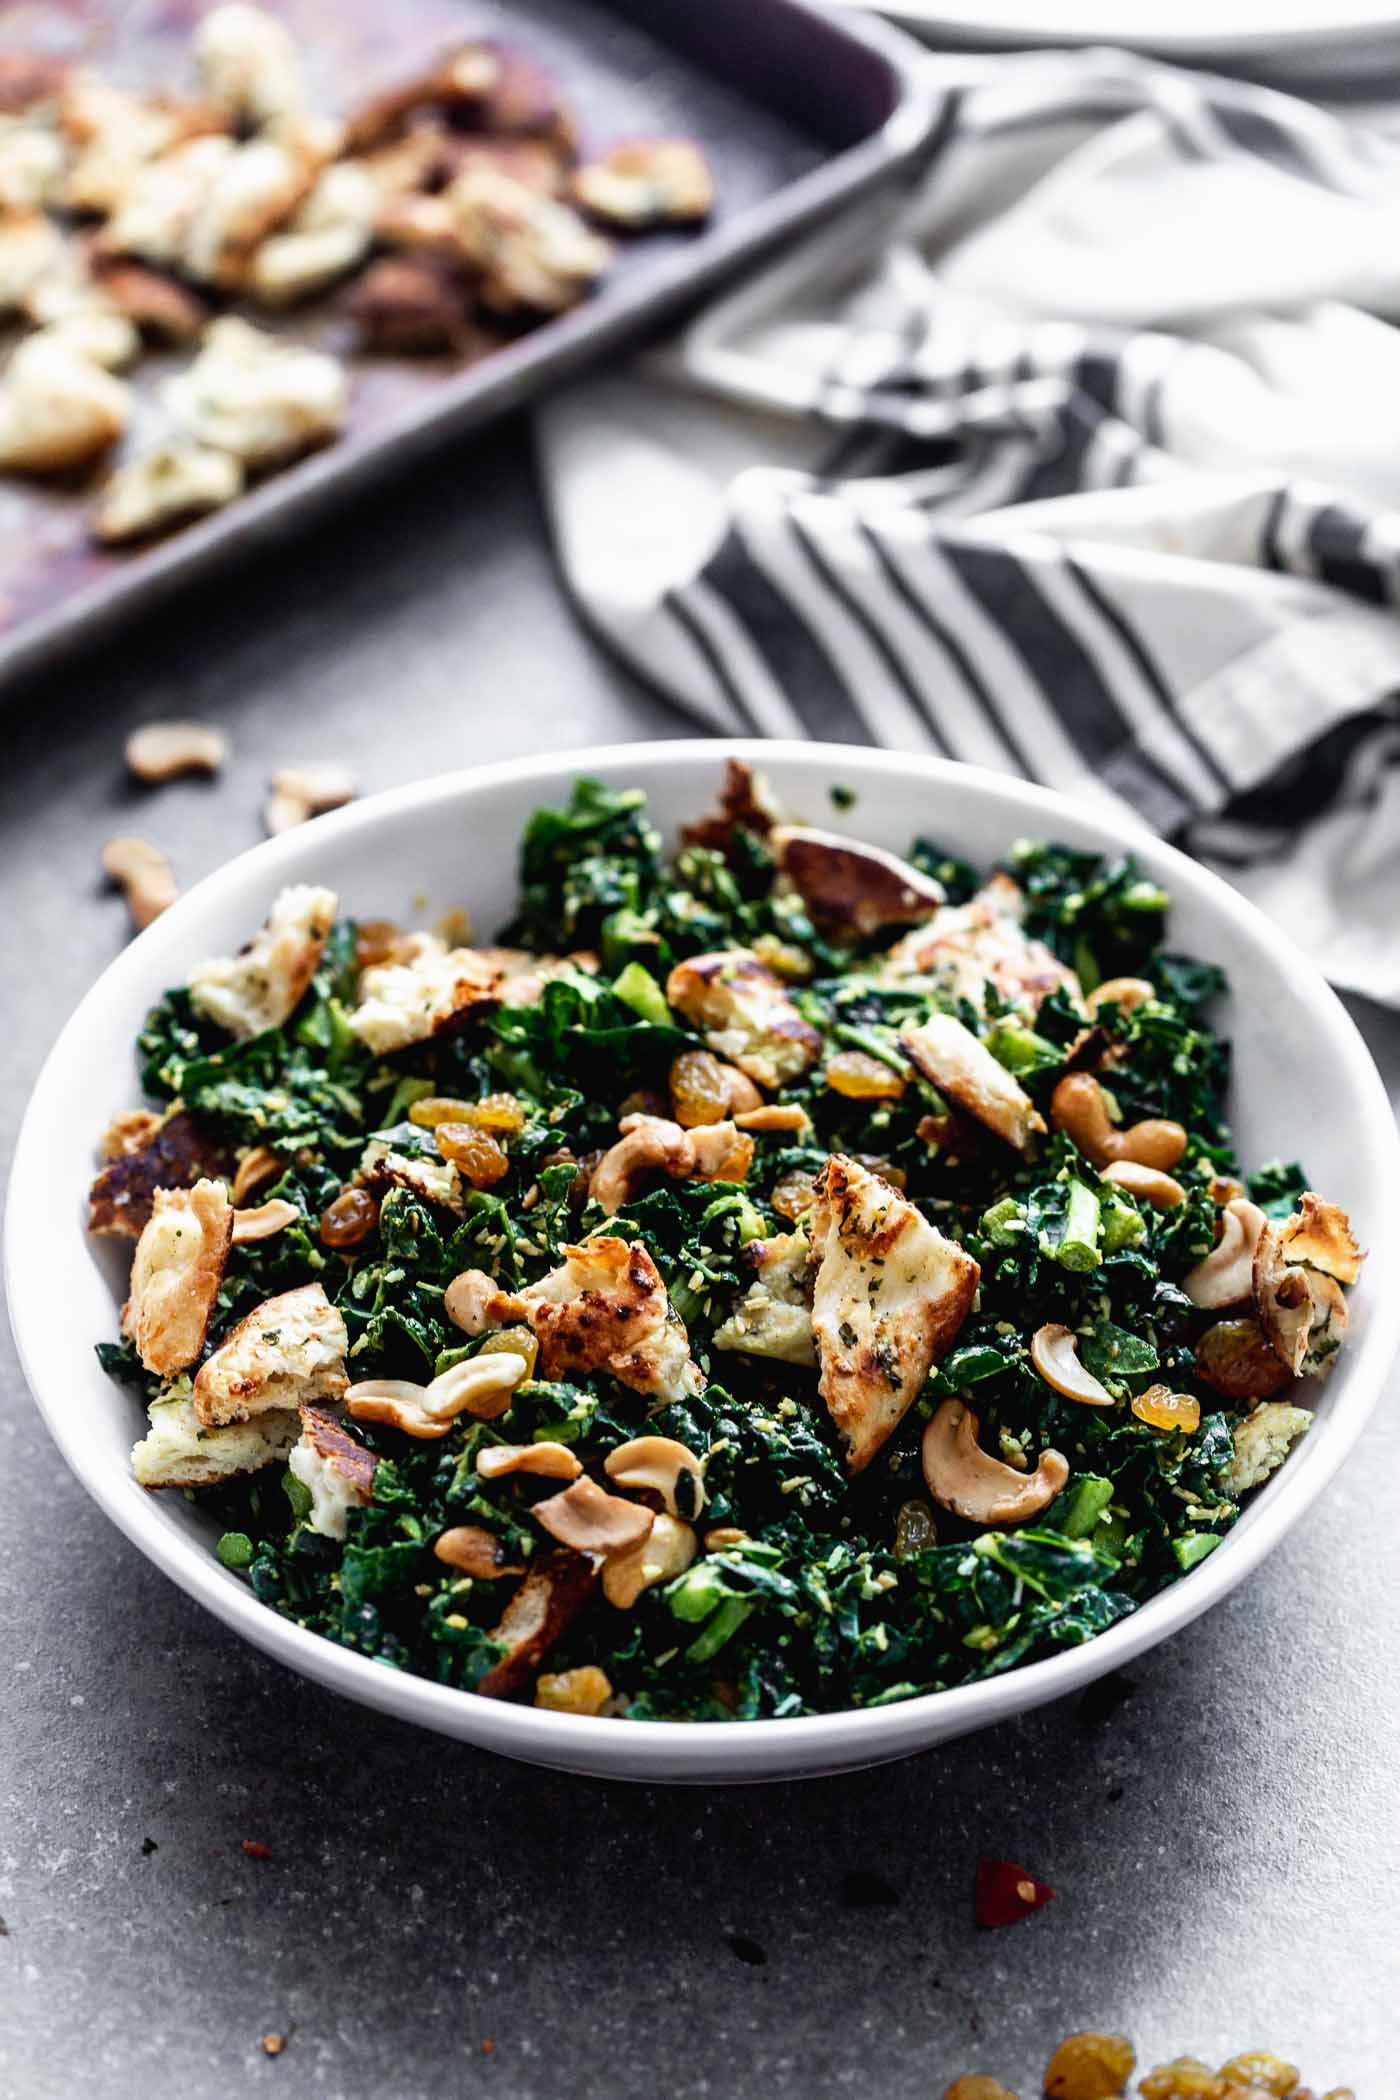 Coconut Curry Kale Salad with Naan Croutons